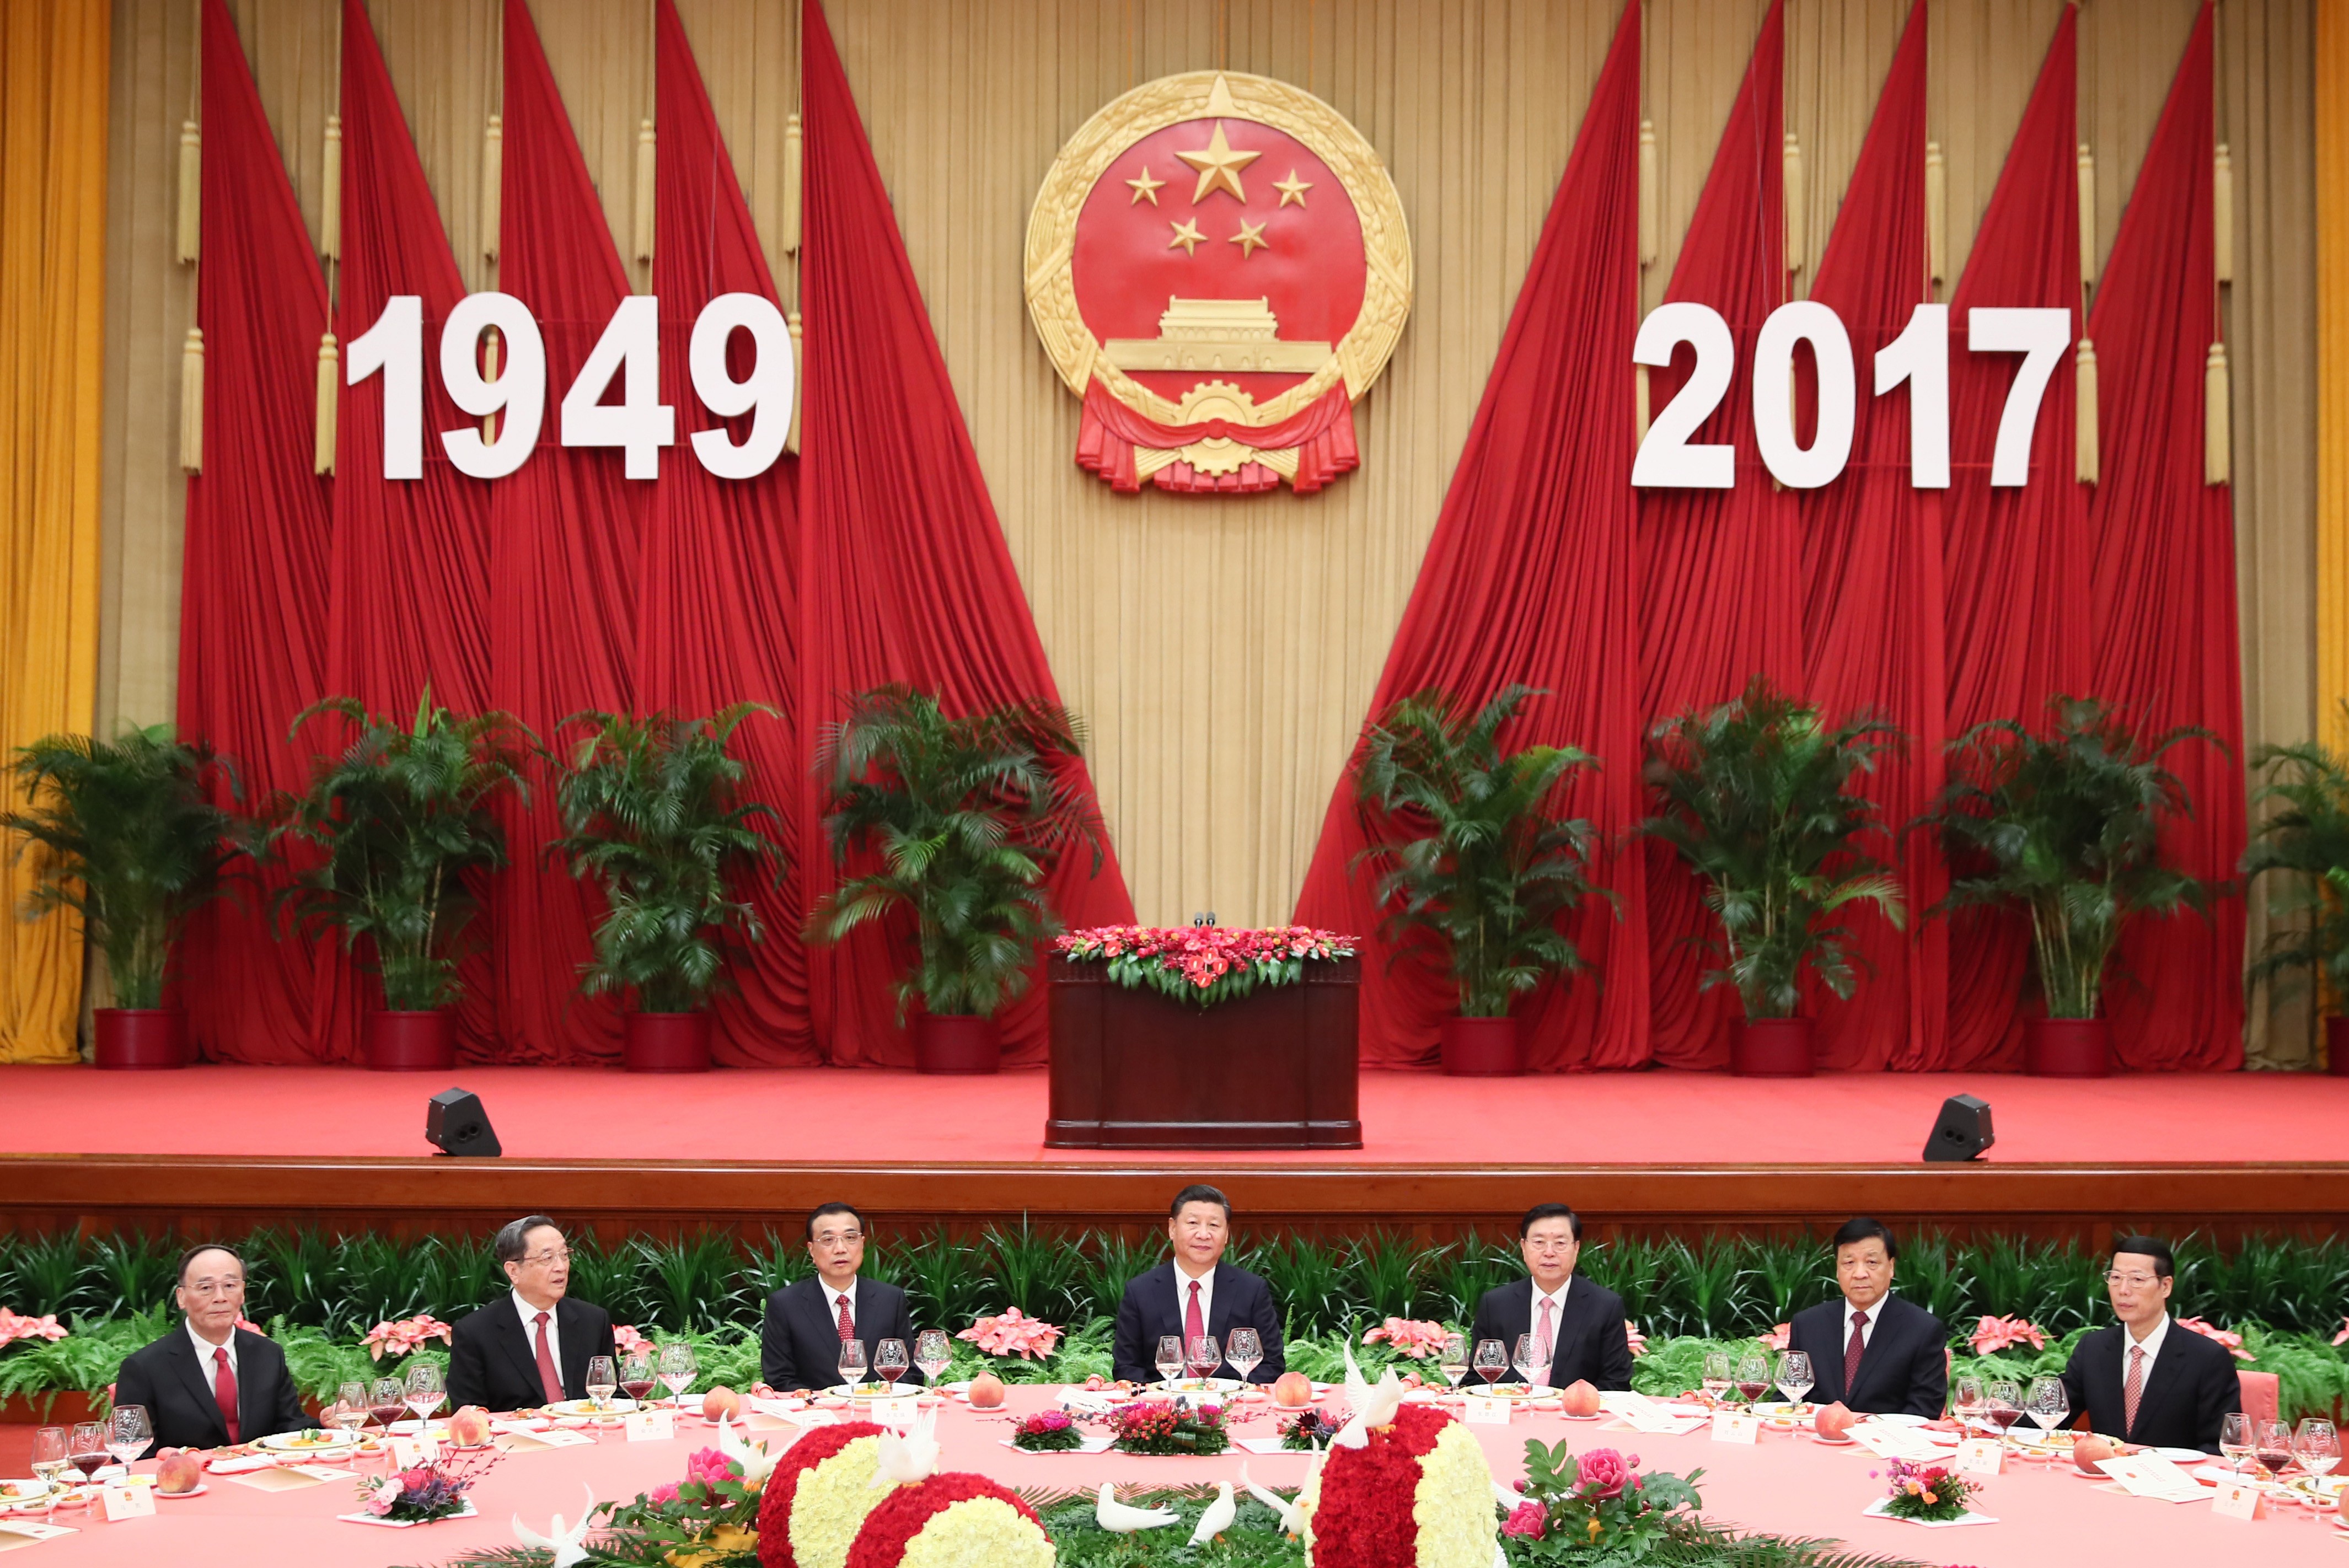 Chinese President Xi Jinping (centre), Premier Li Keqiang (third from left), and other senior leaders attend a reception held by the State Council to celebrate the 68th anniversary of the founding of the People's Republic of China, in Beijing on September 30. Photo: Xinhua